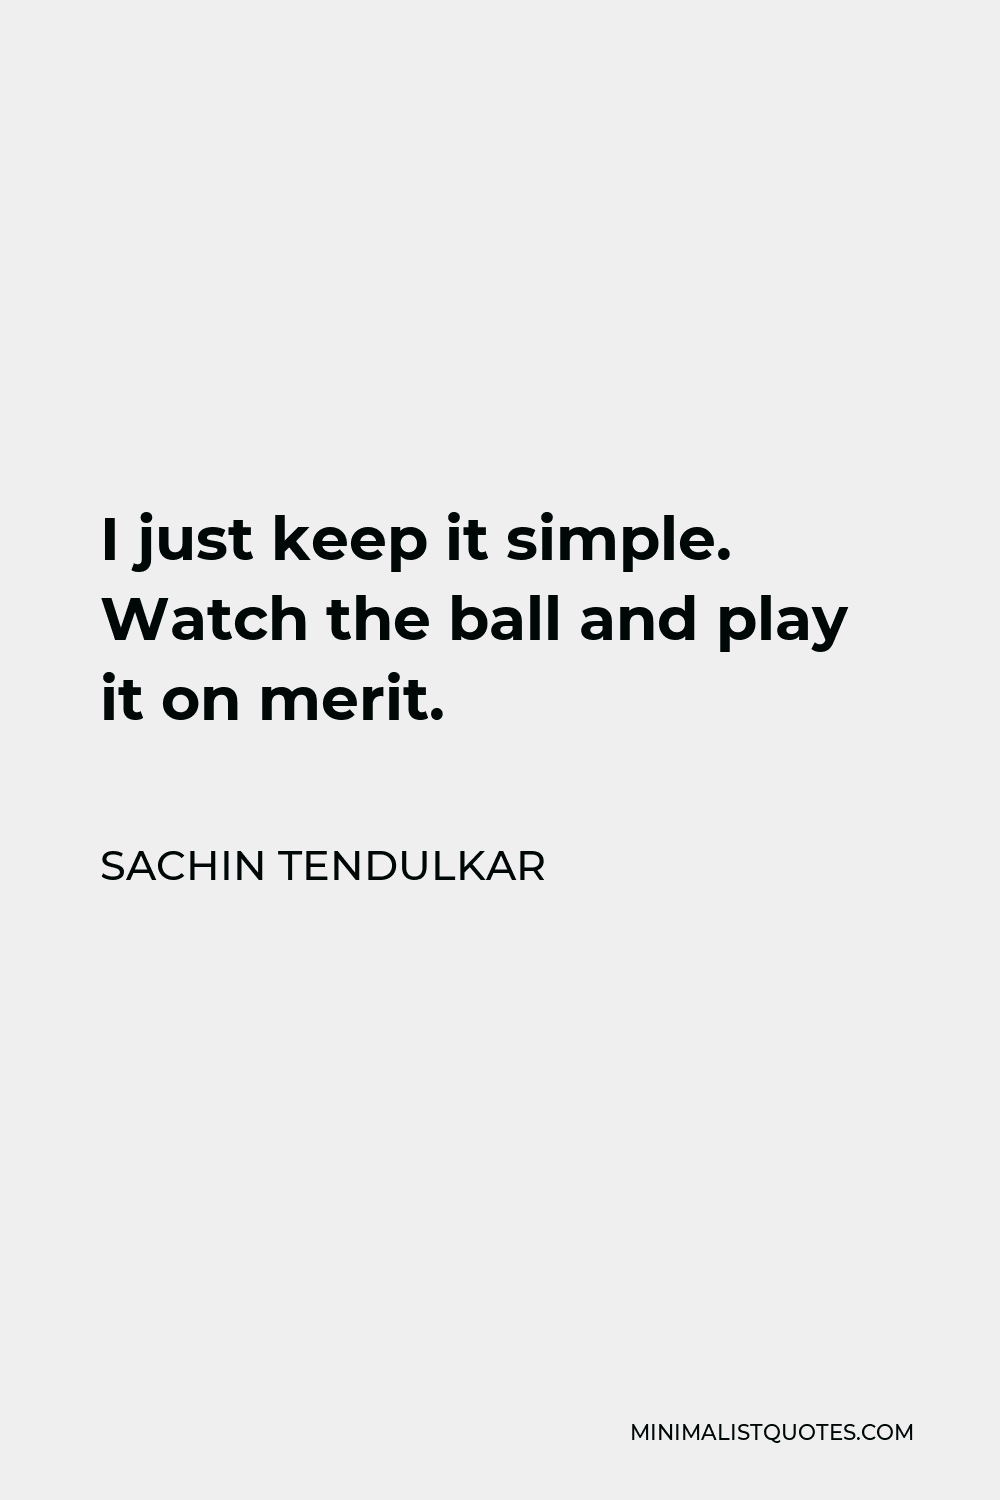 Sachin Tendulkar Quote - I just keep it simple. Watch the ball and play it on merit.